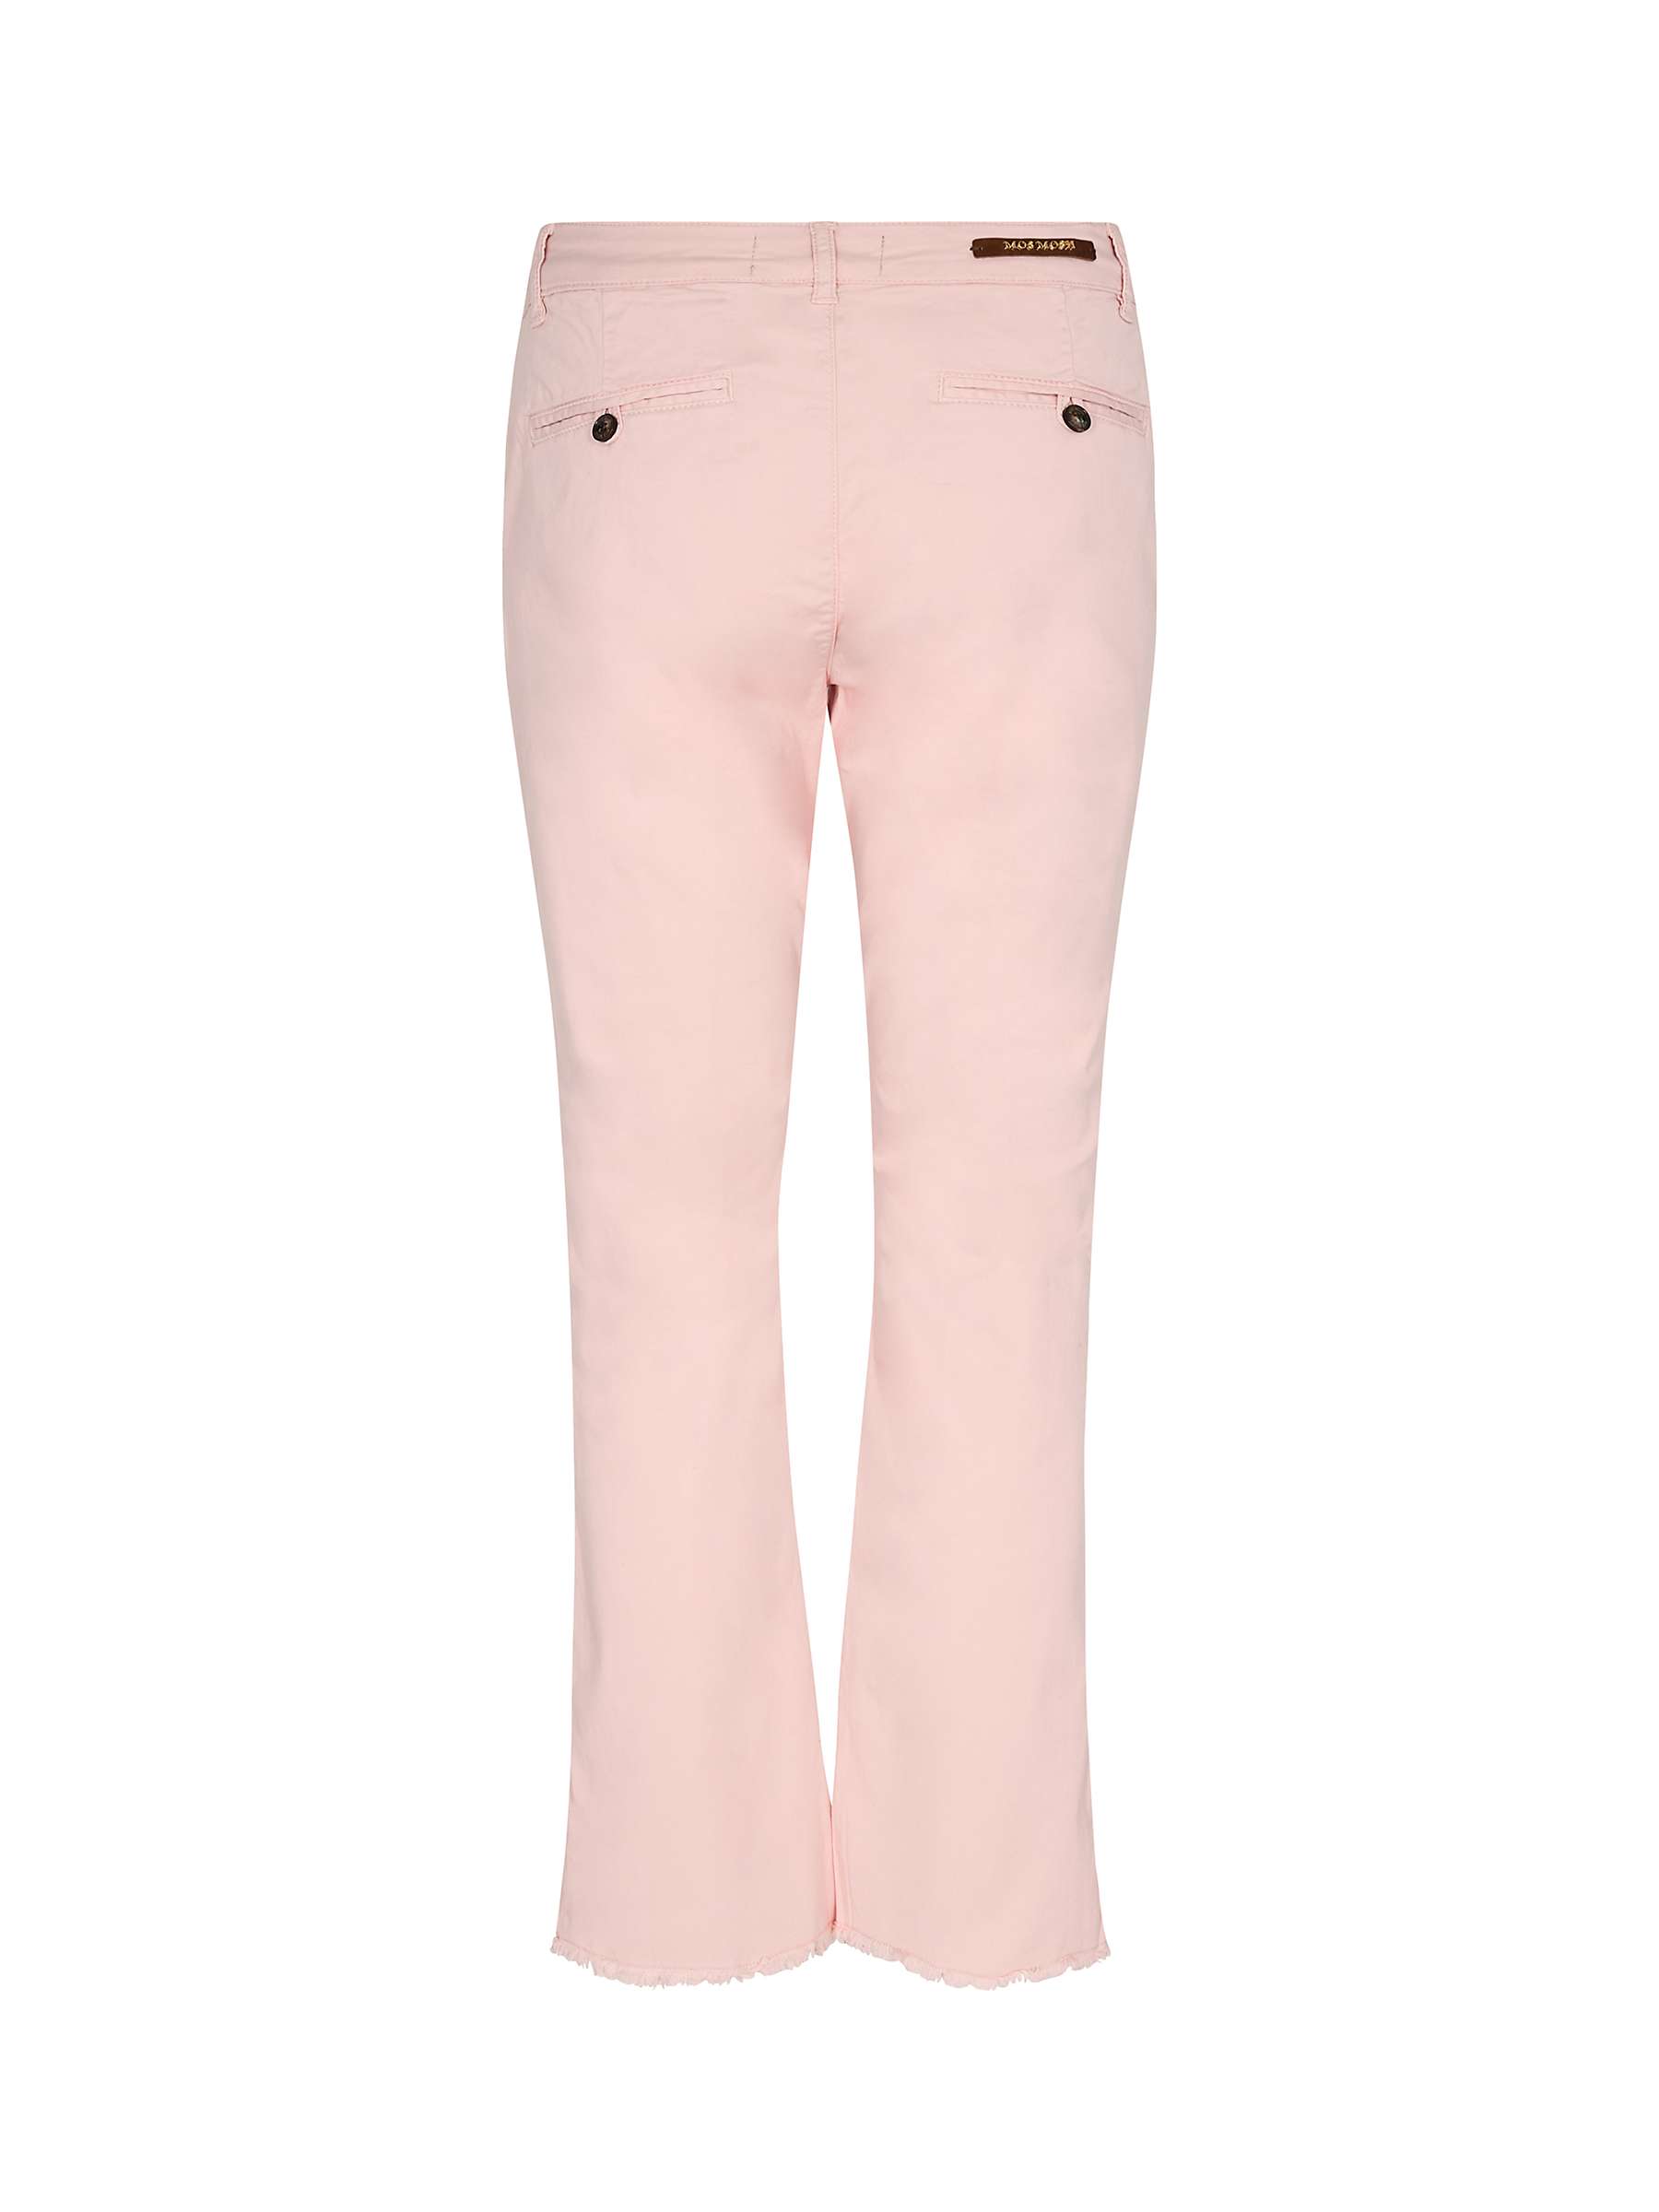 Buy MOS MOSH Clarissa Chino Trousers Online at johnlewis.com